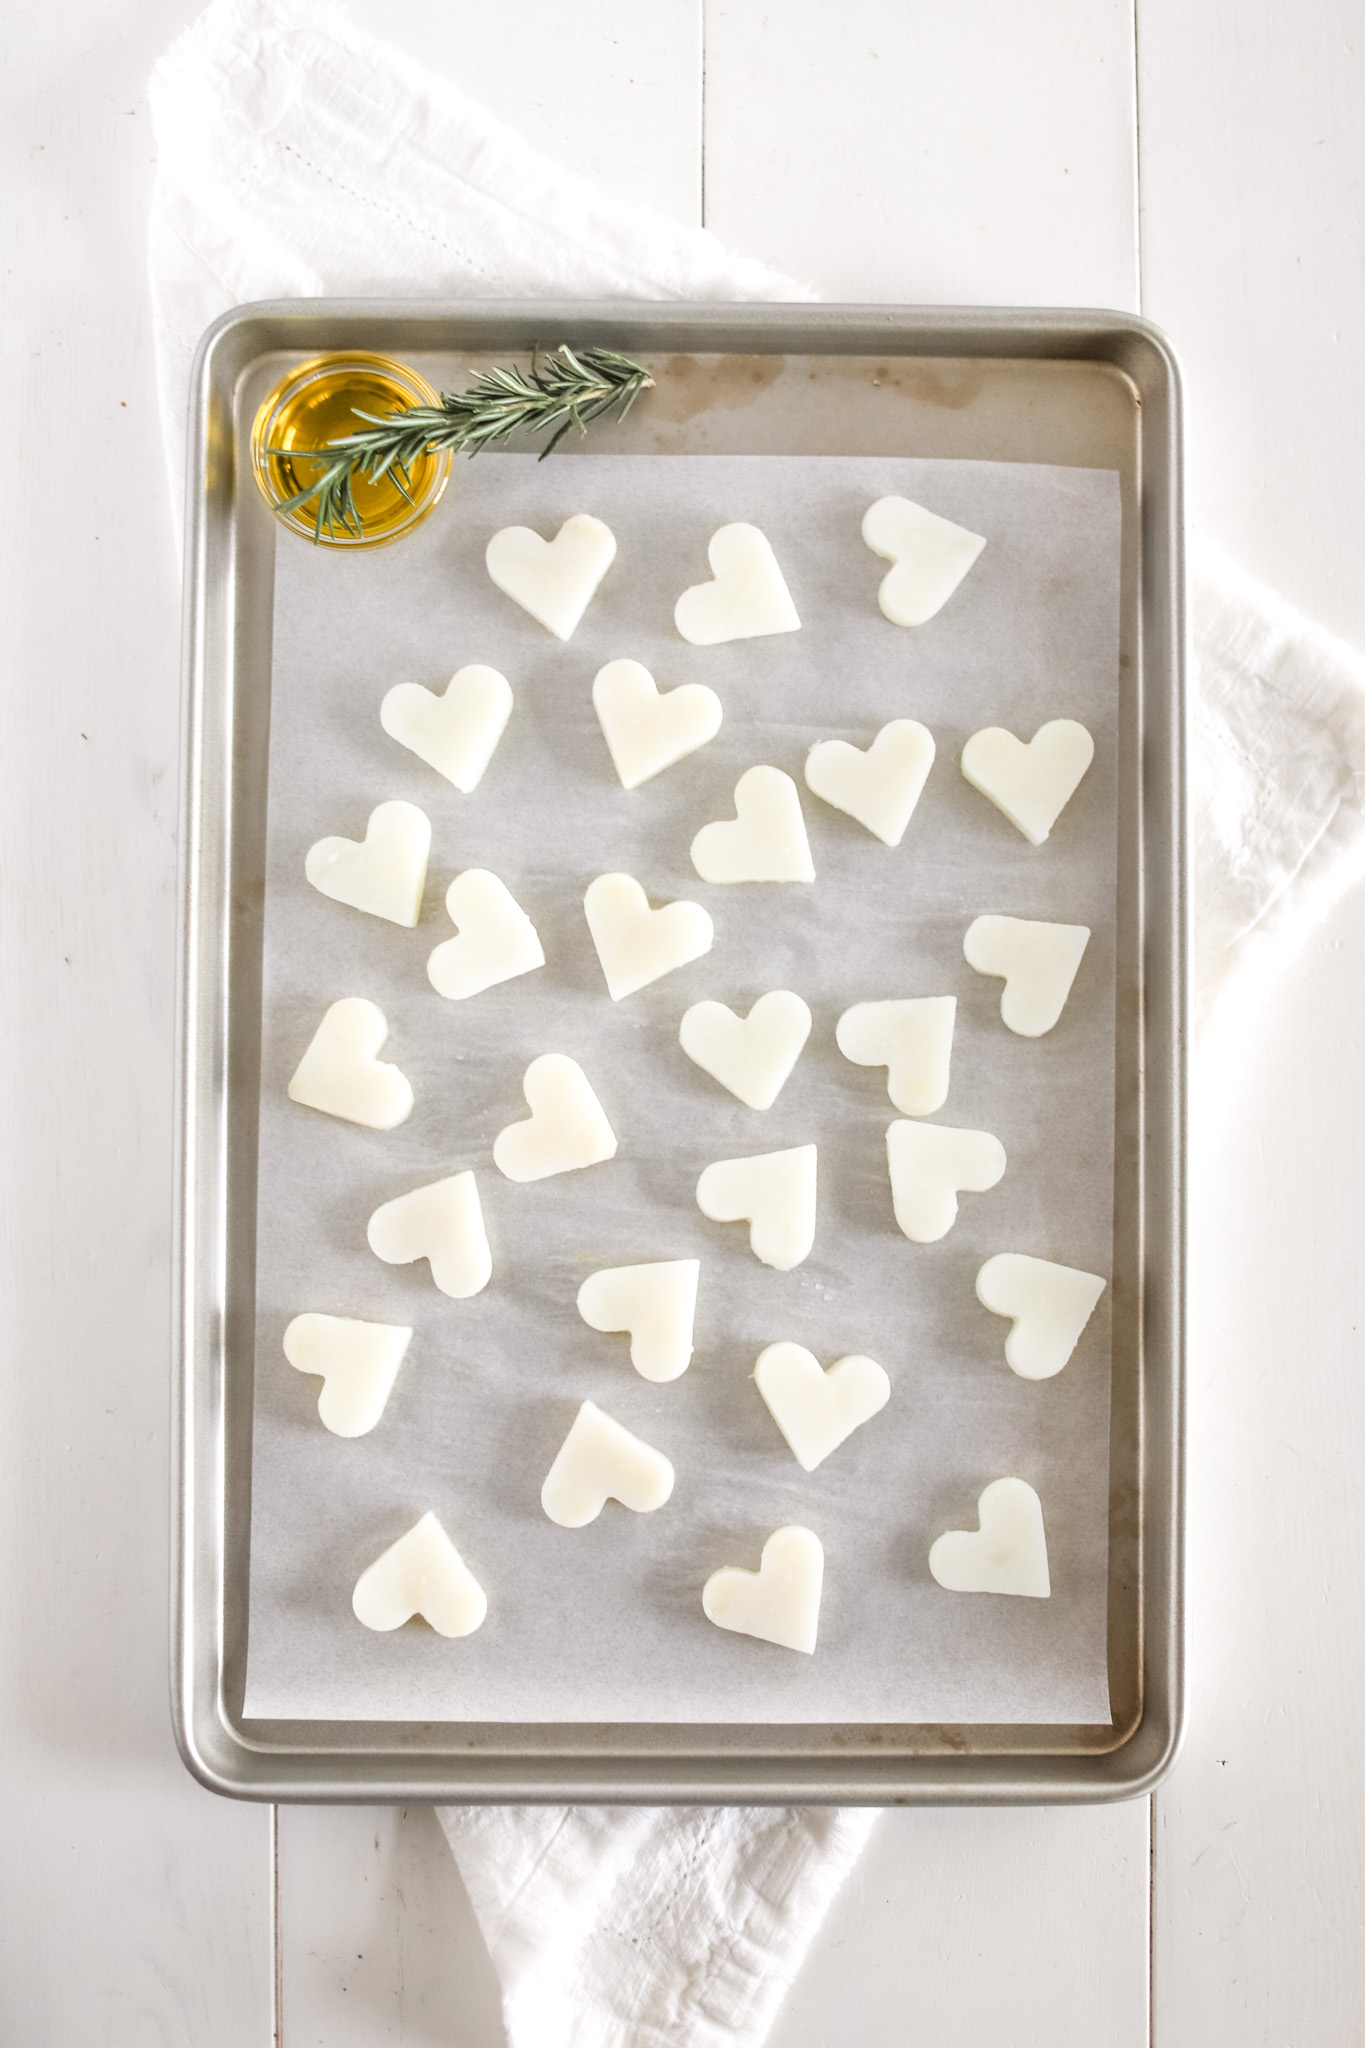 tray of heart shaped potatoes uncooked